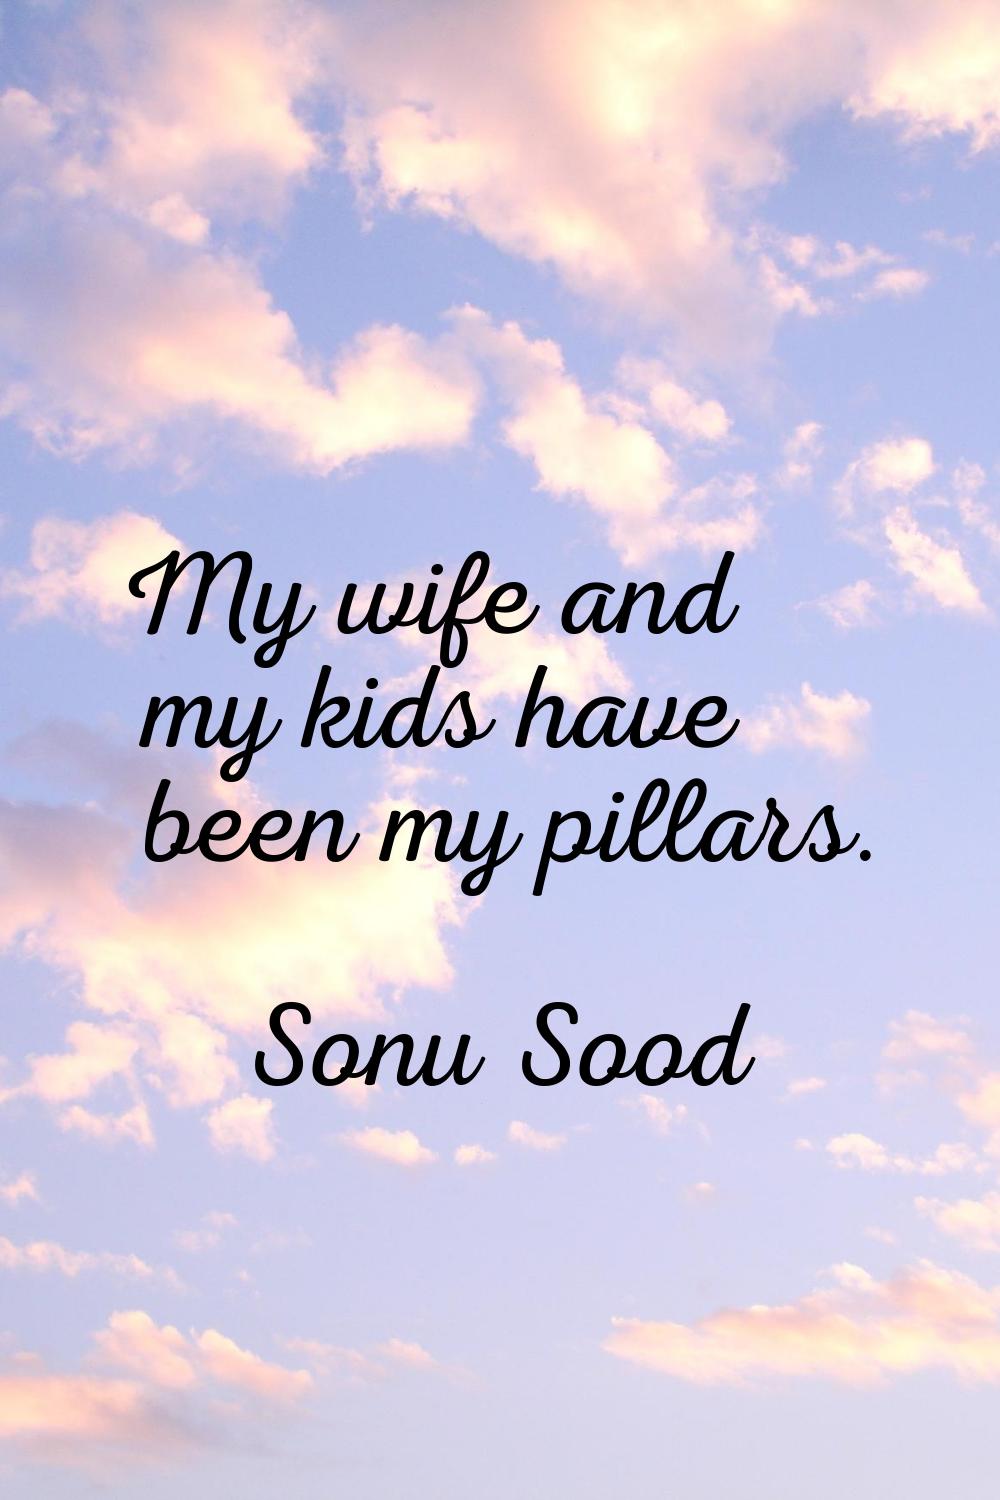 My wife and my kids have been my pillars.